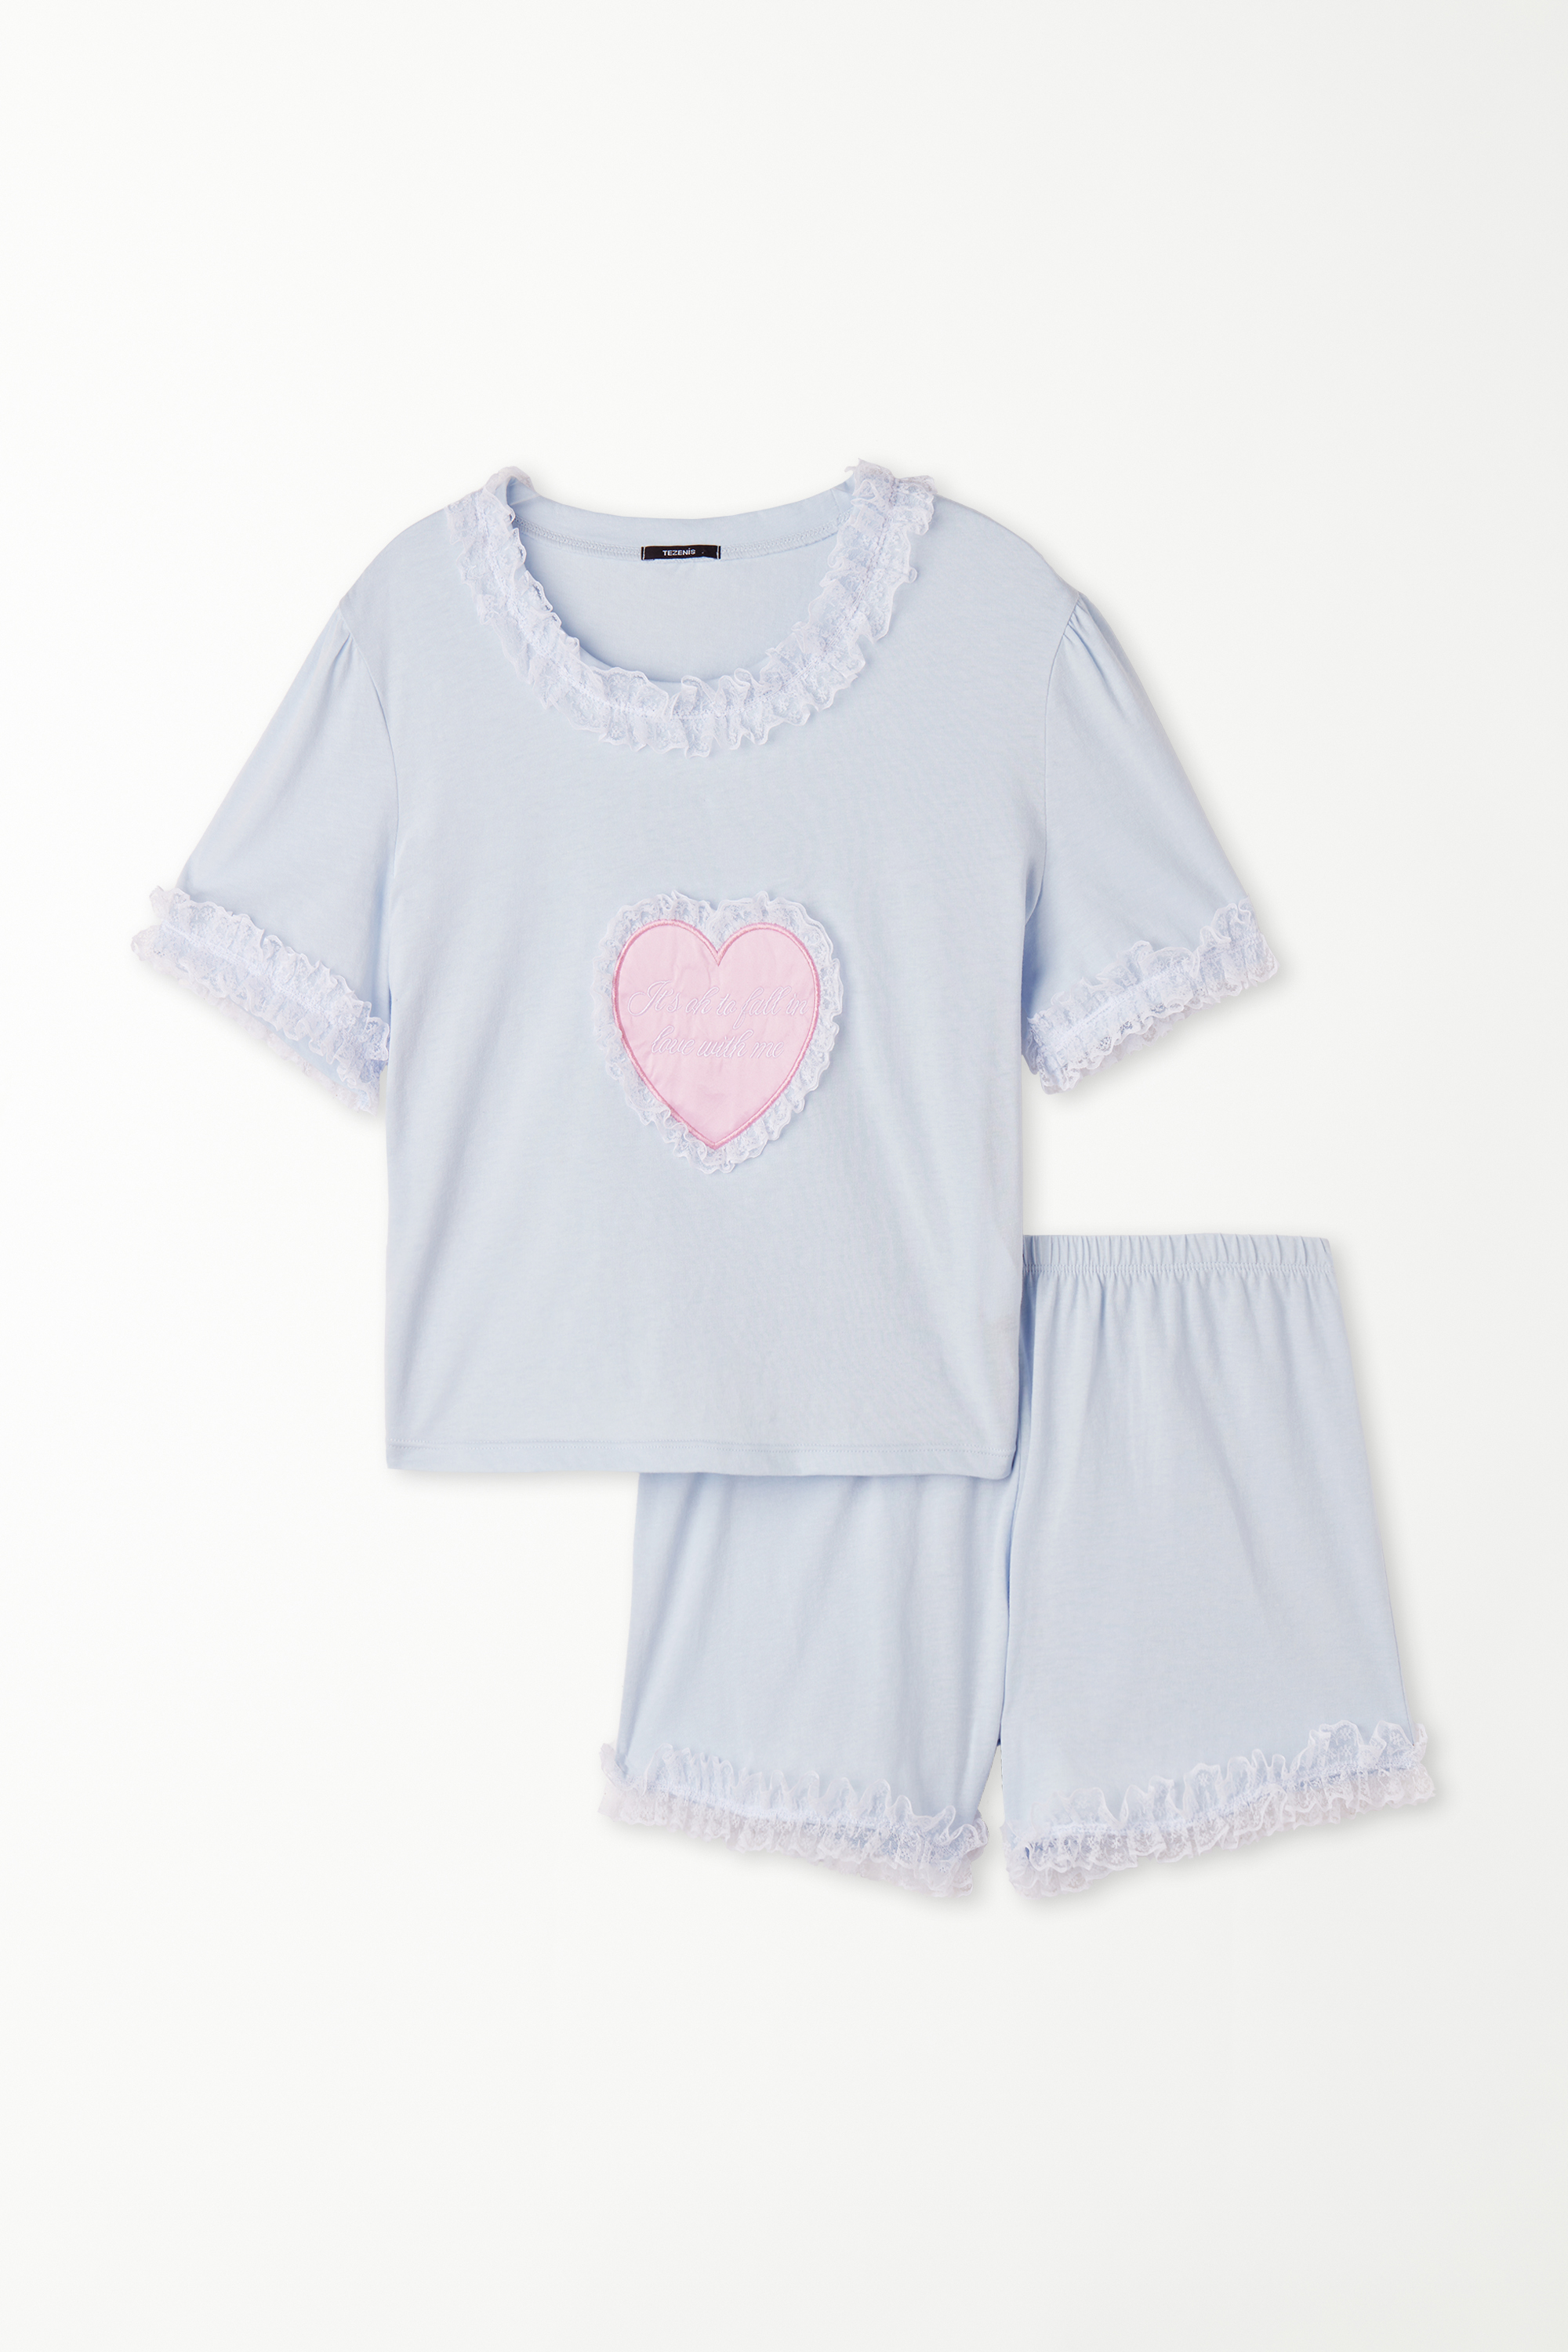 Short-Sleeved Cotton and Lace "Fall in Love" Short Pyjamas